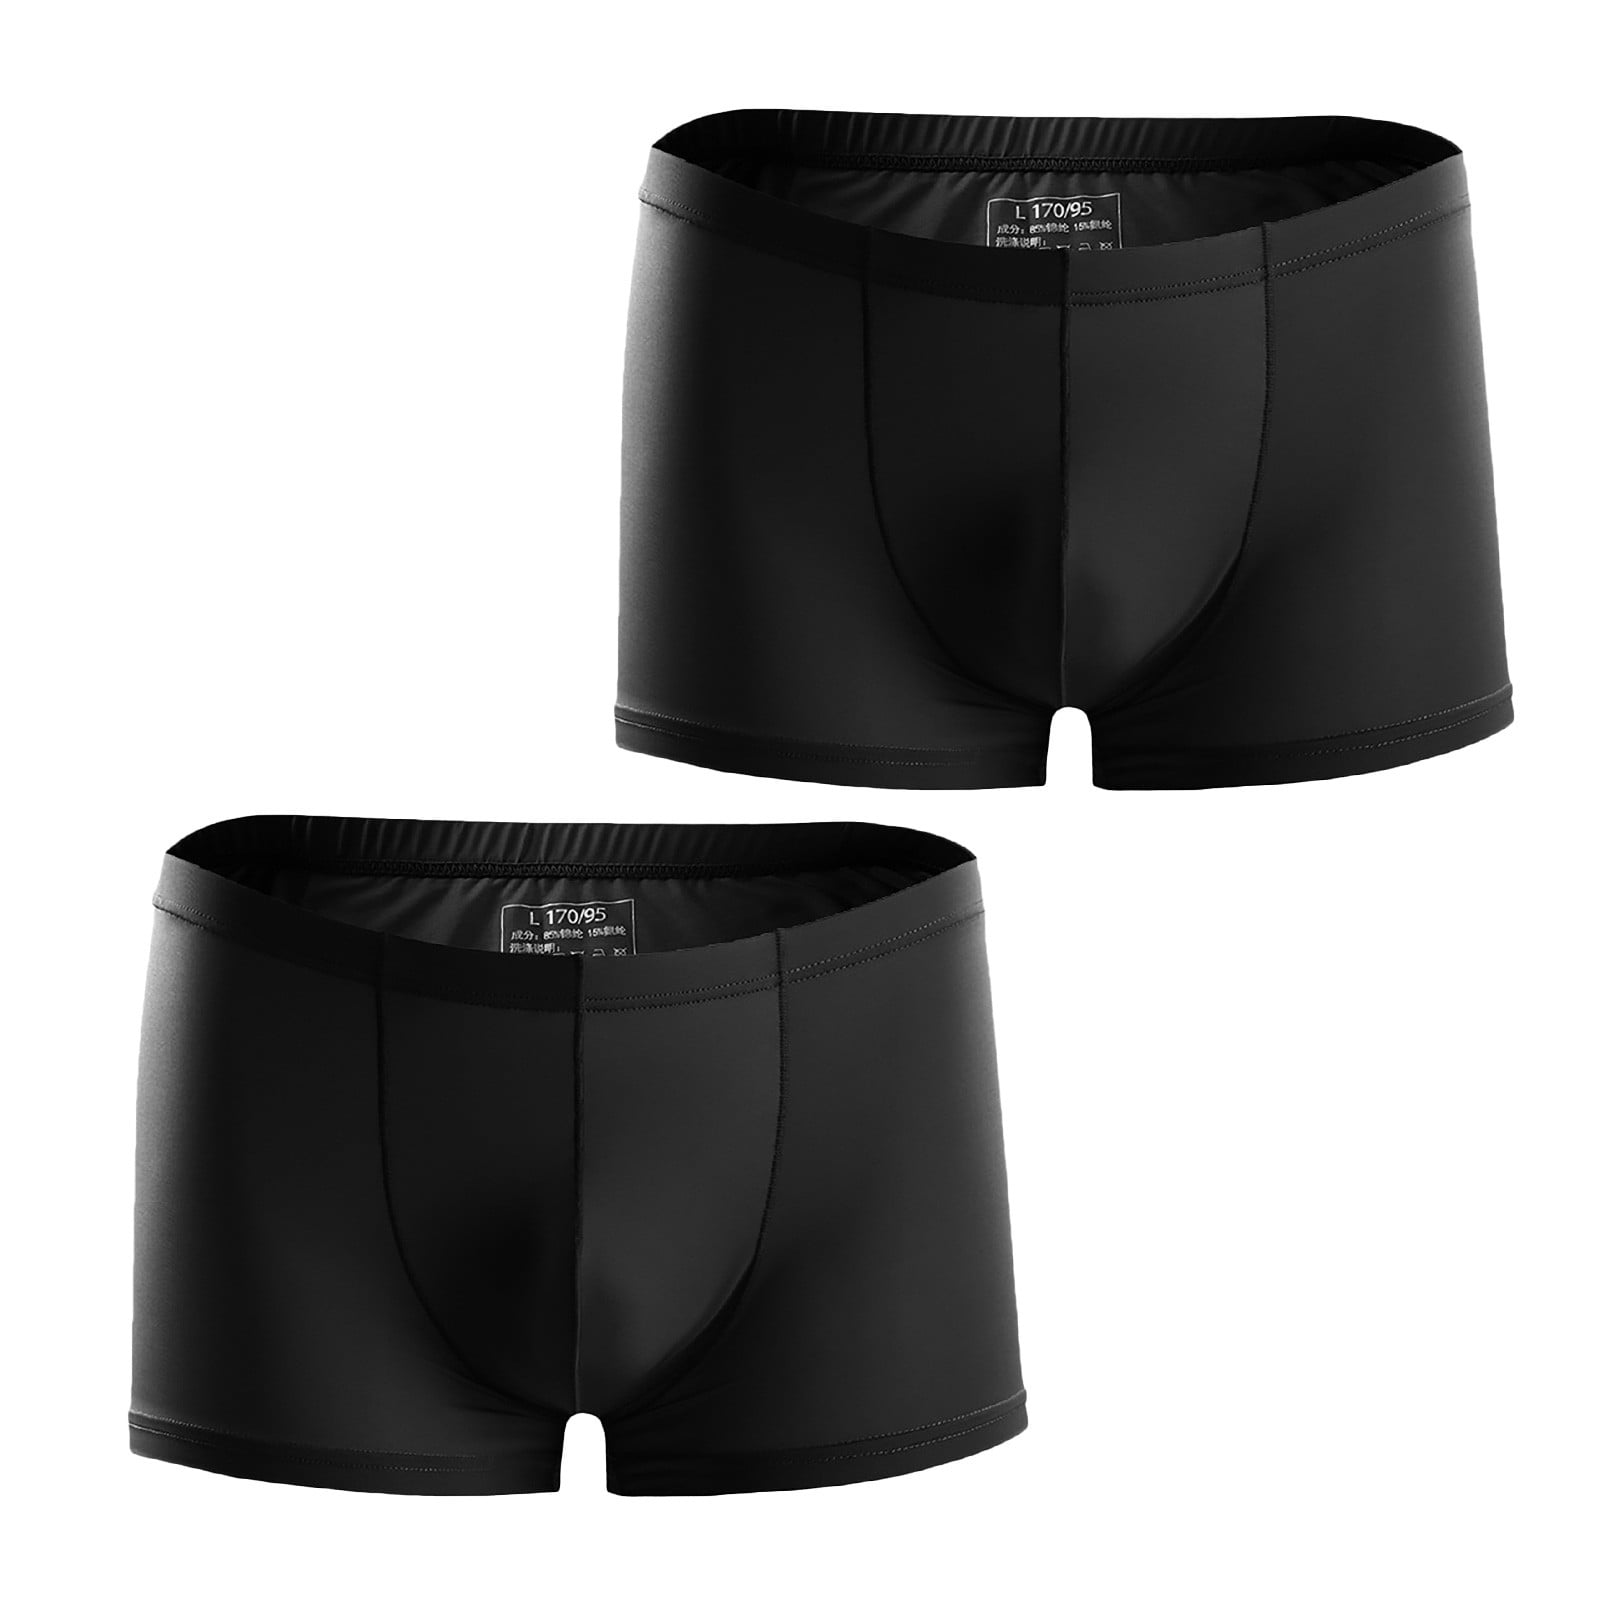 AXXD Men Underwear Boxer Brief,Hollow-carved Stylish Extra-wide Mid ...